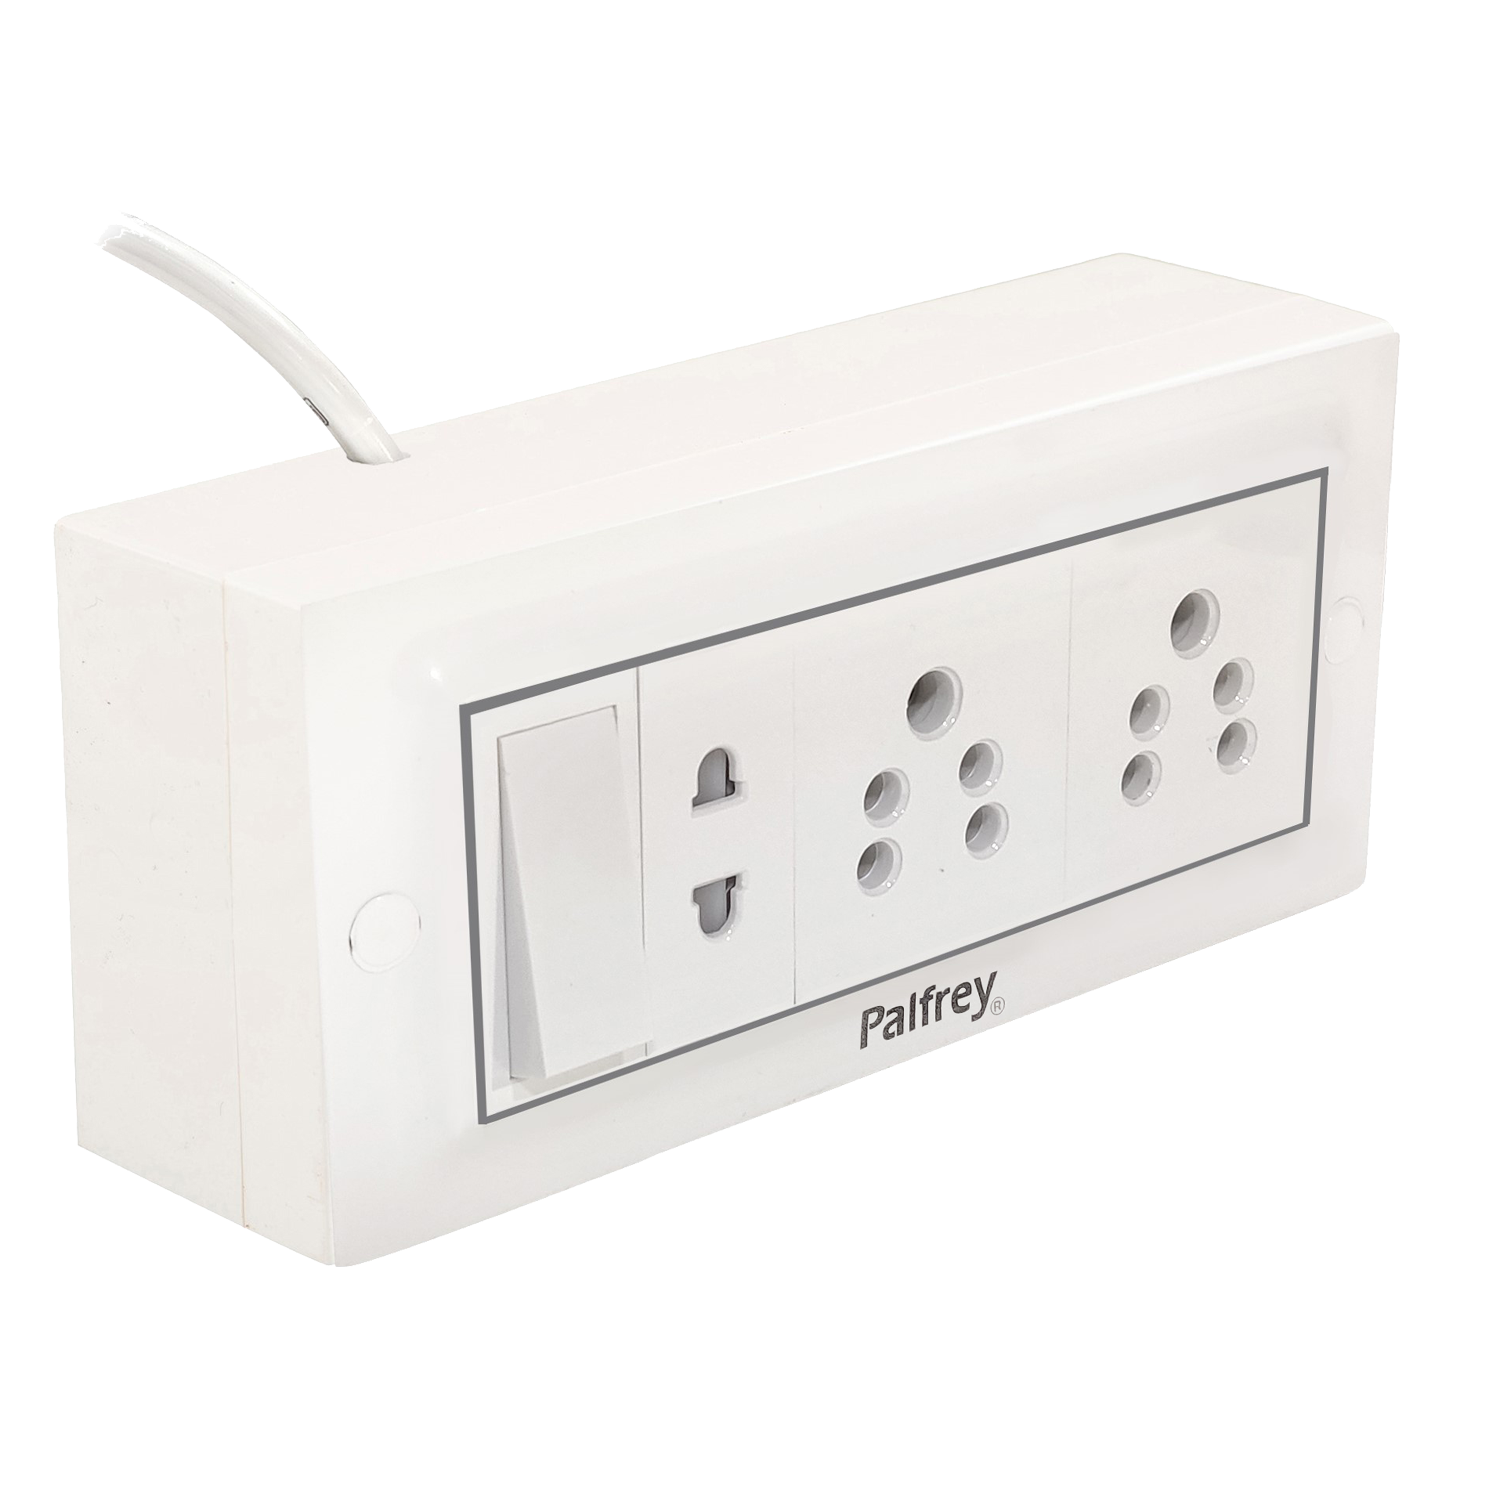 Palfrey Electric Extension Board - 5A + 5A + 1 Universal Two Pin Socket with Master Switch and Heavy Duty Wire (White)